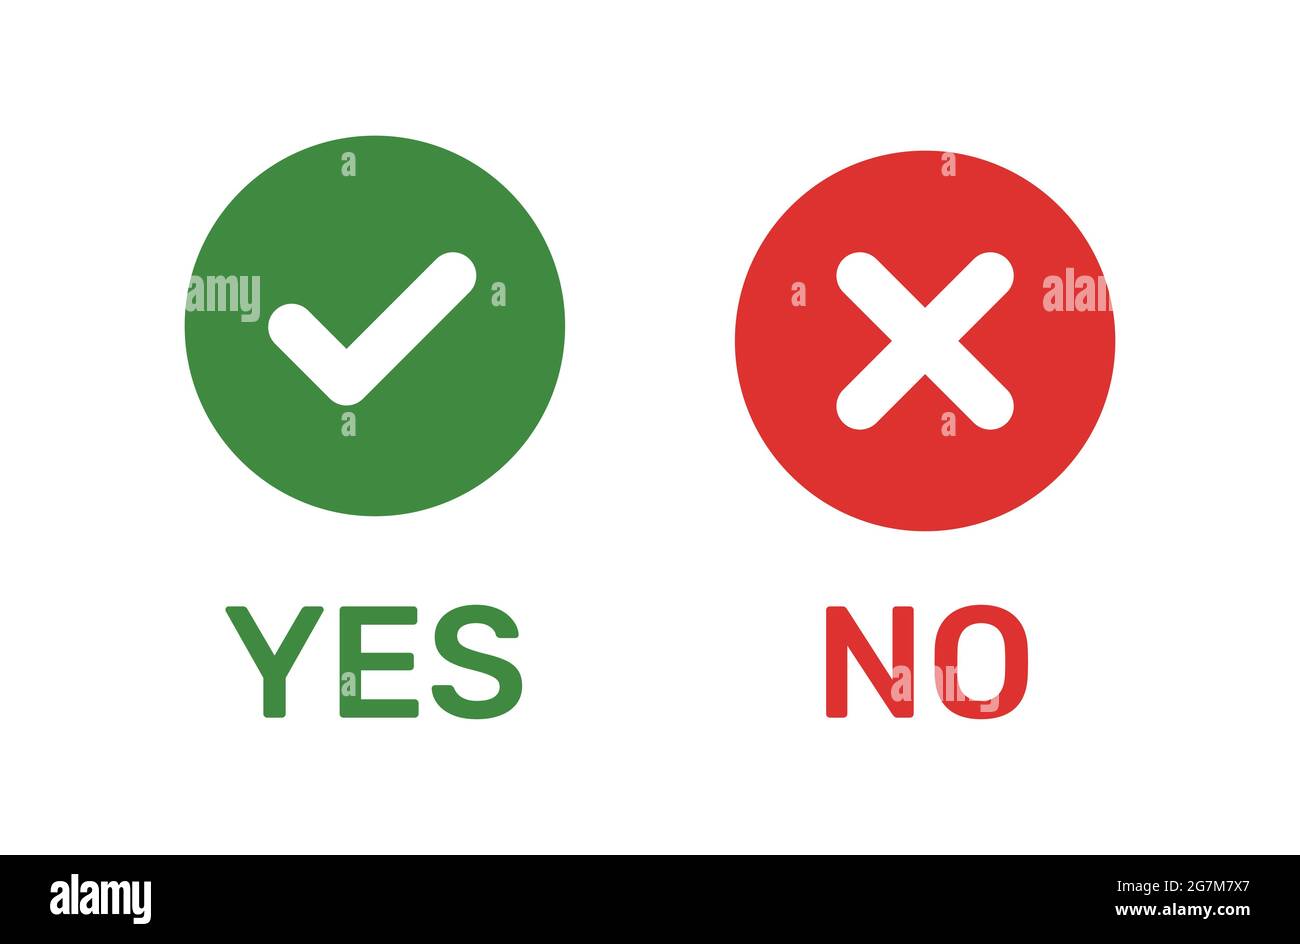 Yes and No icon button, Green check, red cross sign. Vector illustration Stock Vector